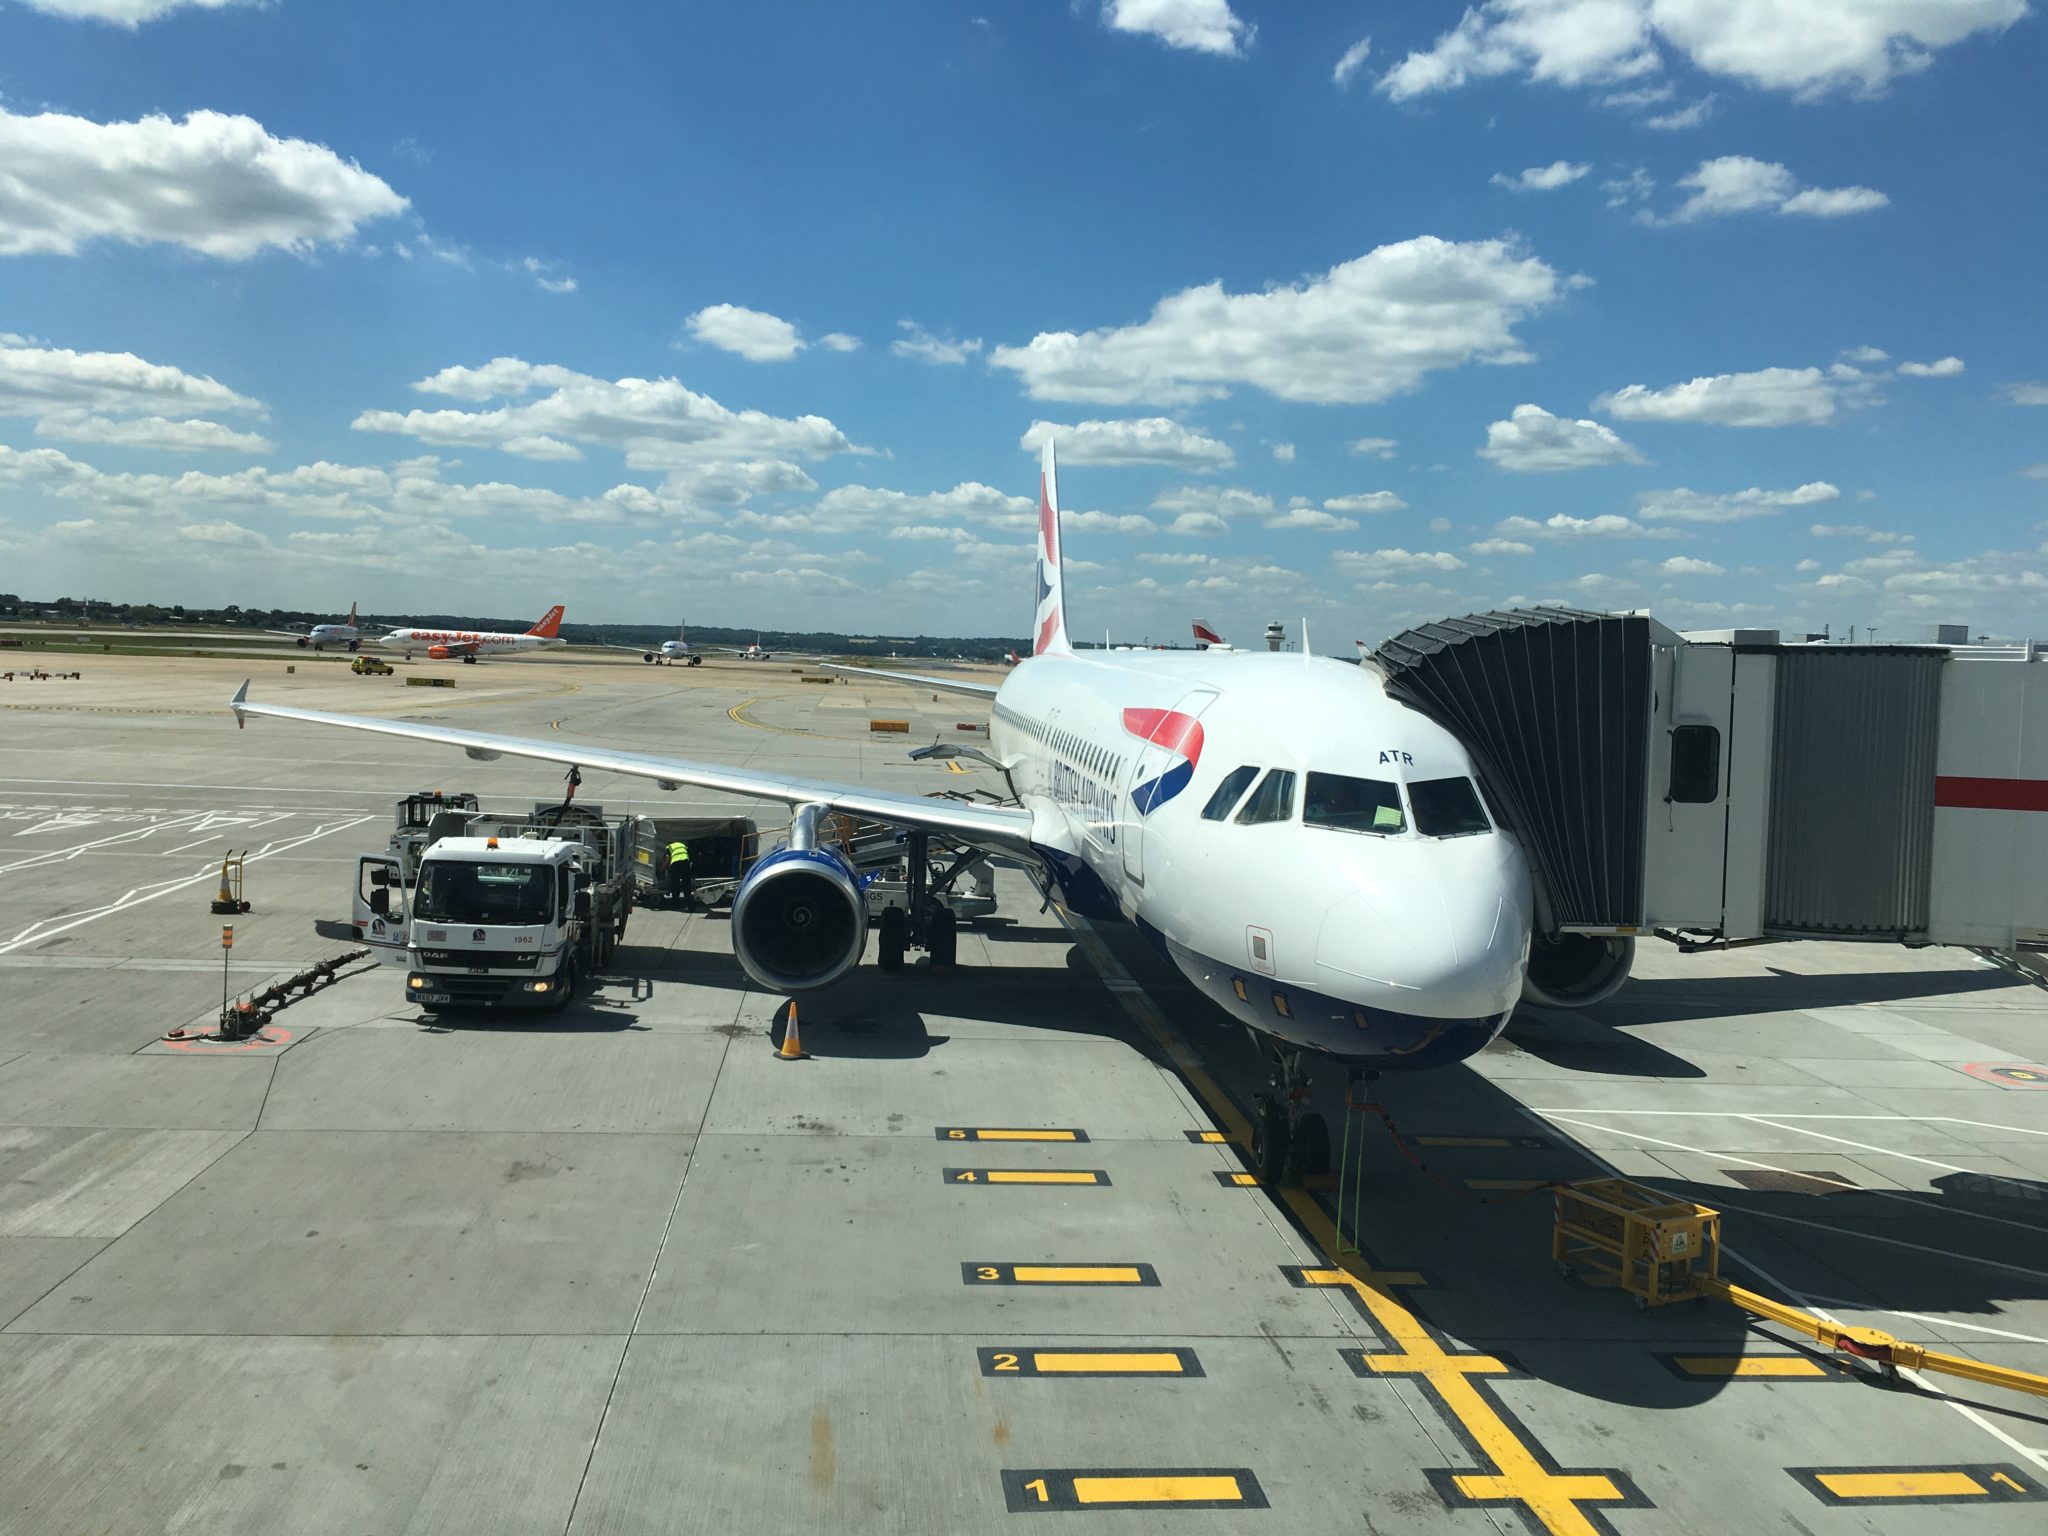 British Airways Airbus A320 at a gate at London Gatwick Airport